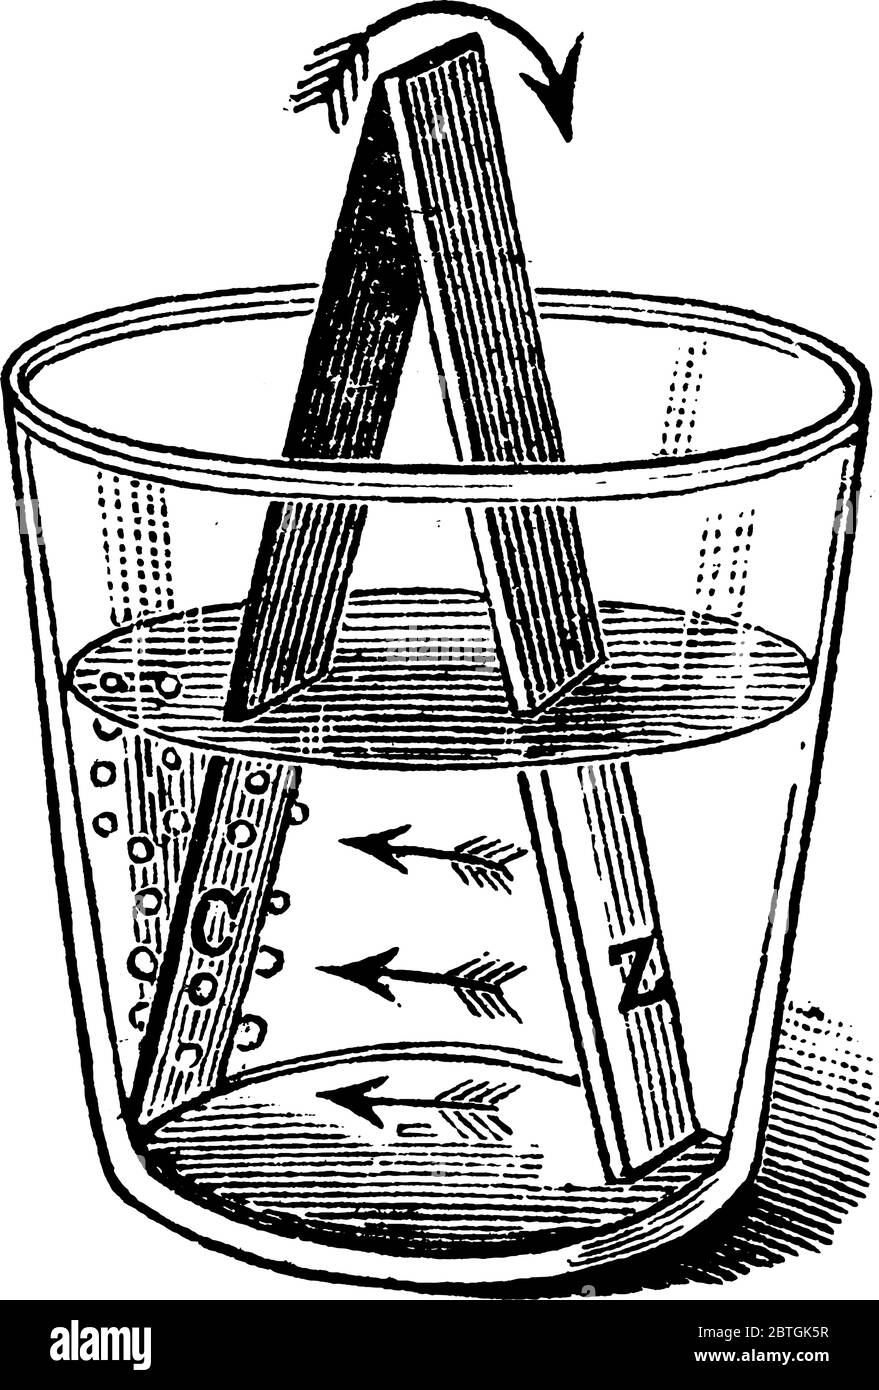 An experimental set-up with zinc, copper strip, acid and mercury, to demonstrate the flow of current, electricity, vintage line drawing or engraving i Stock Vector